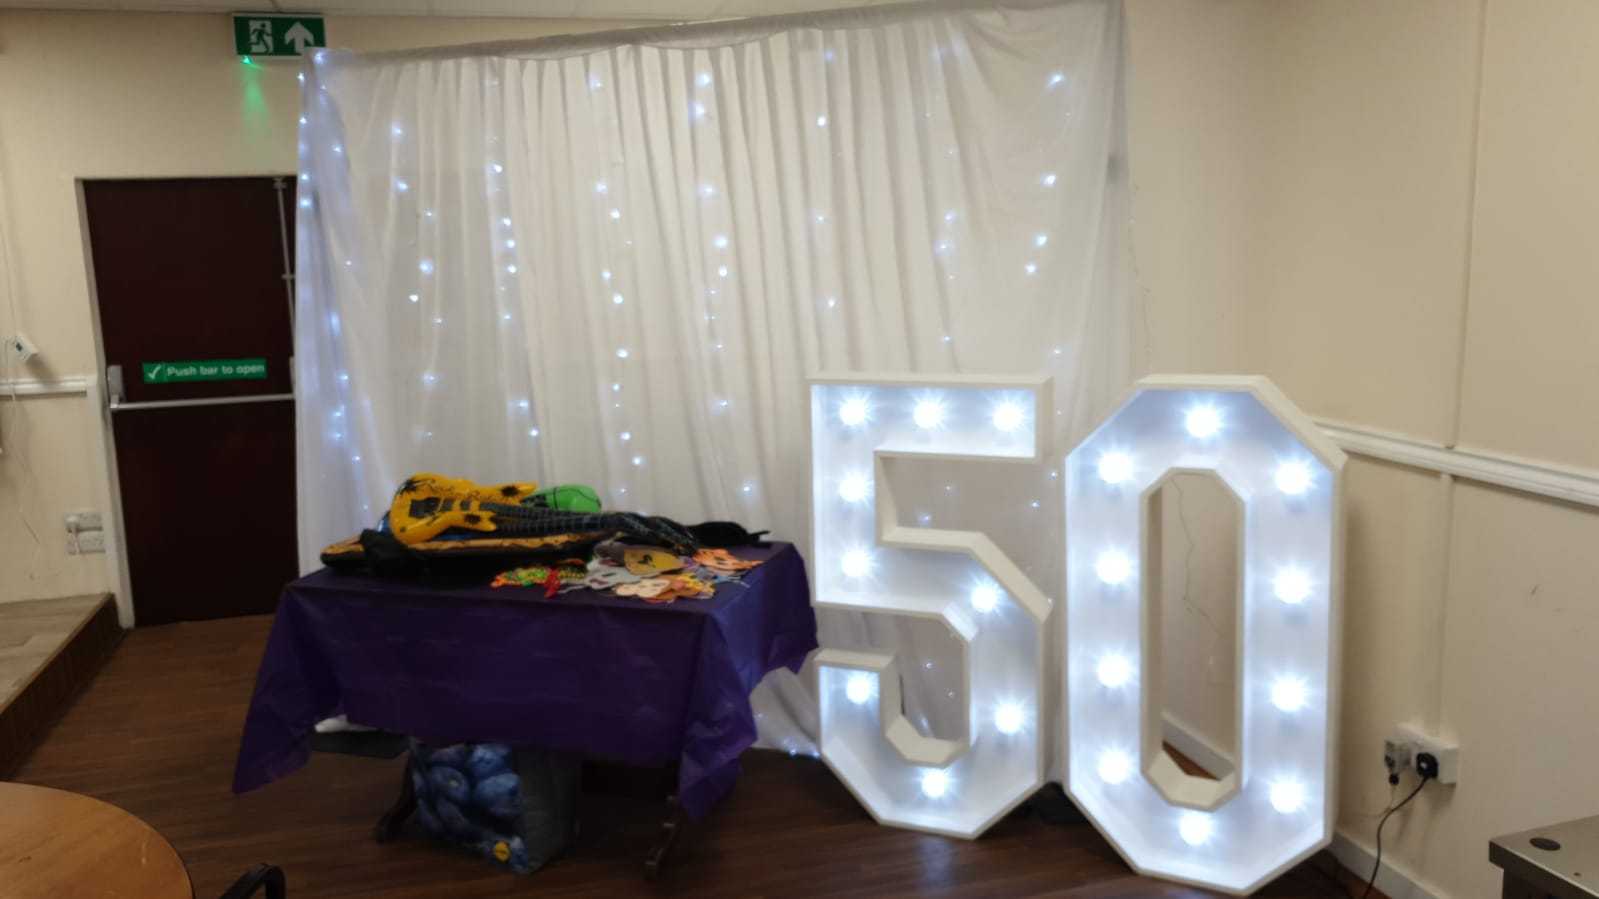 Light_Up_Numbers_50_008